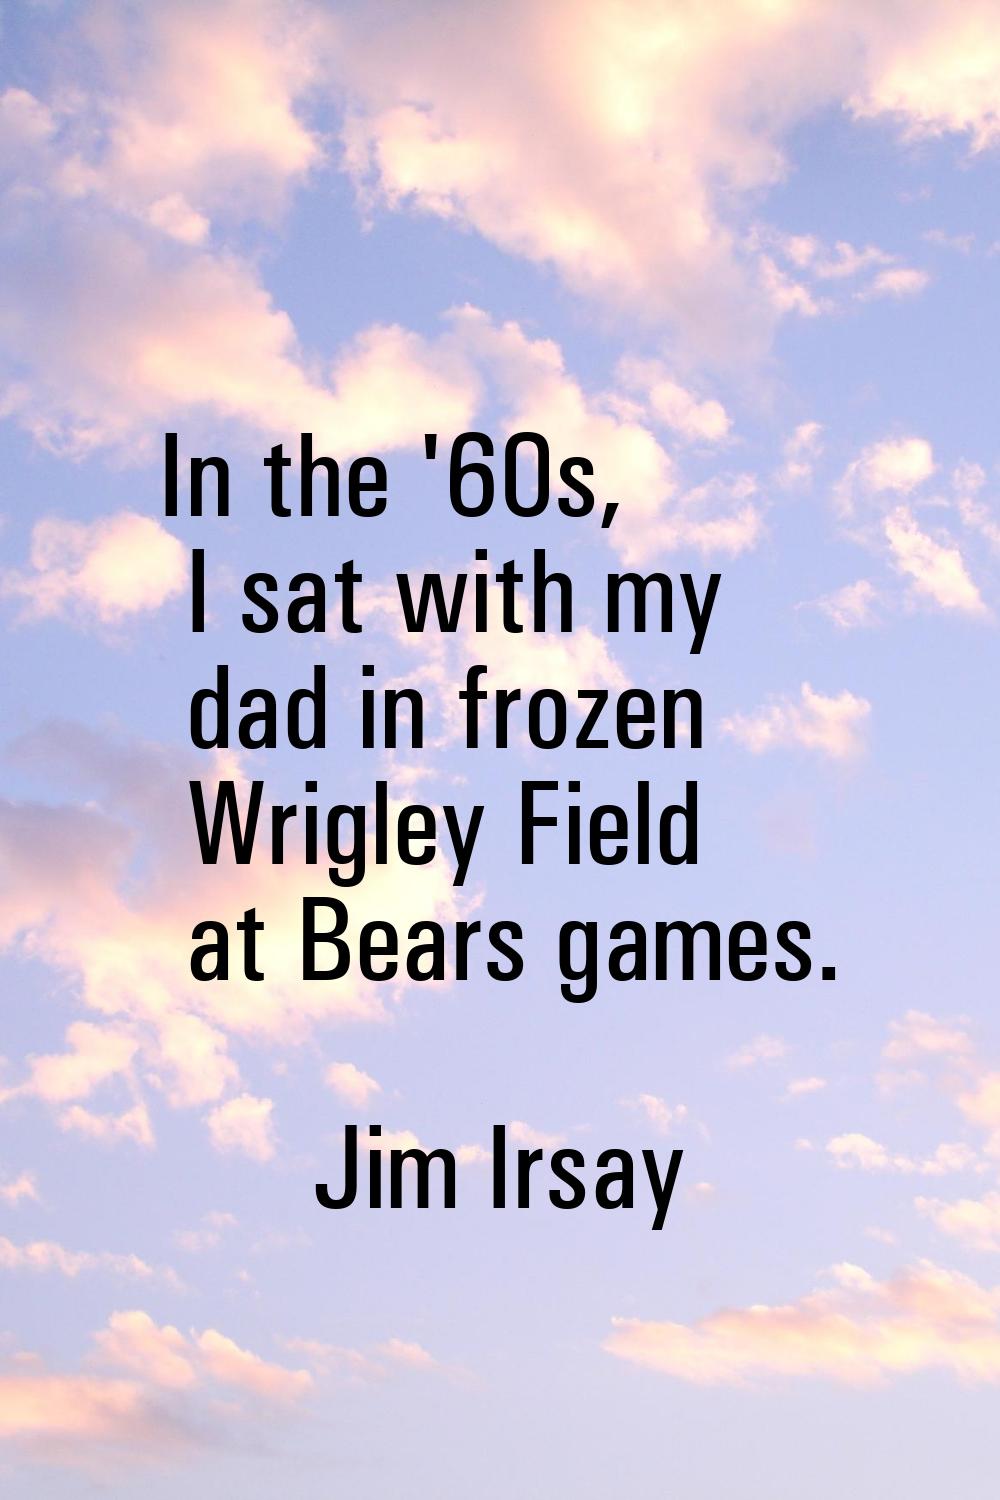 In the '60s, I sat with my dad in frozen Wrigley Field at Bears games.